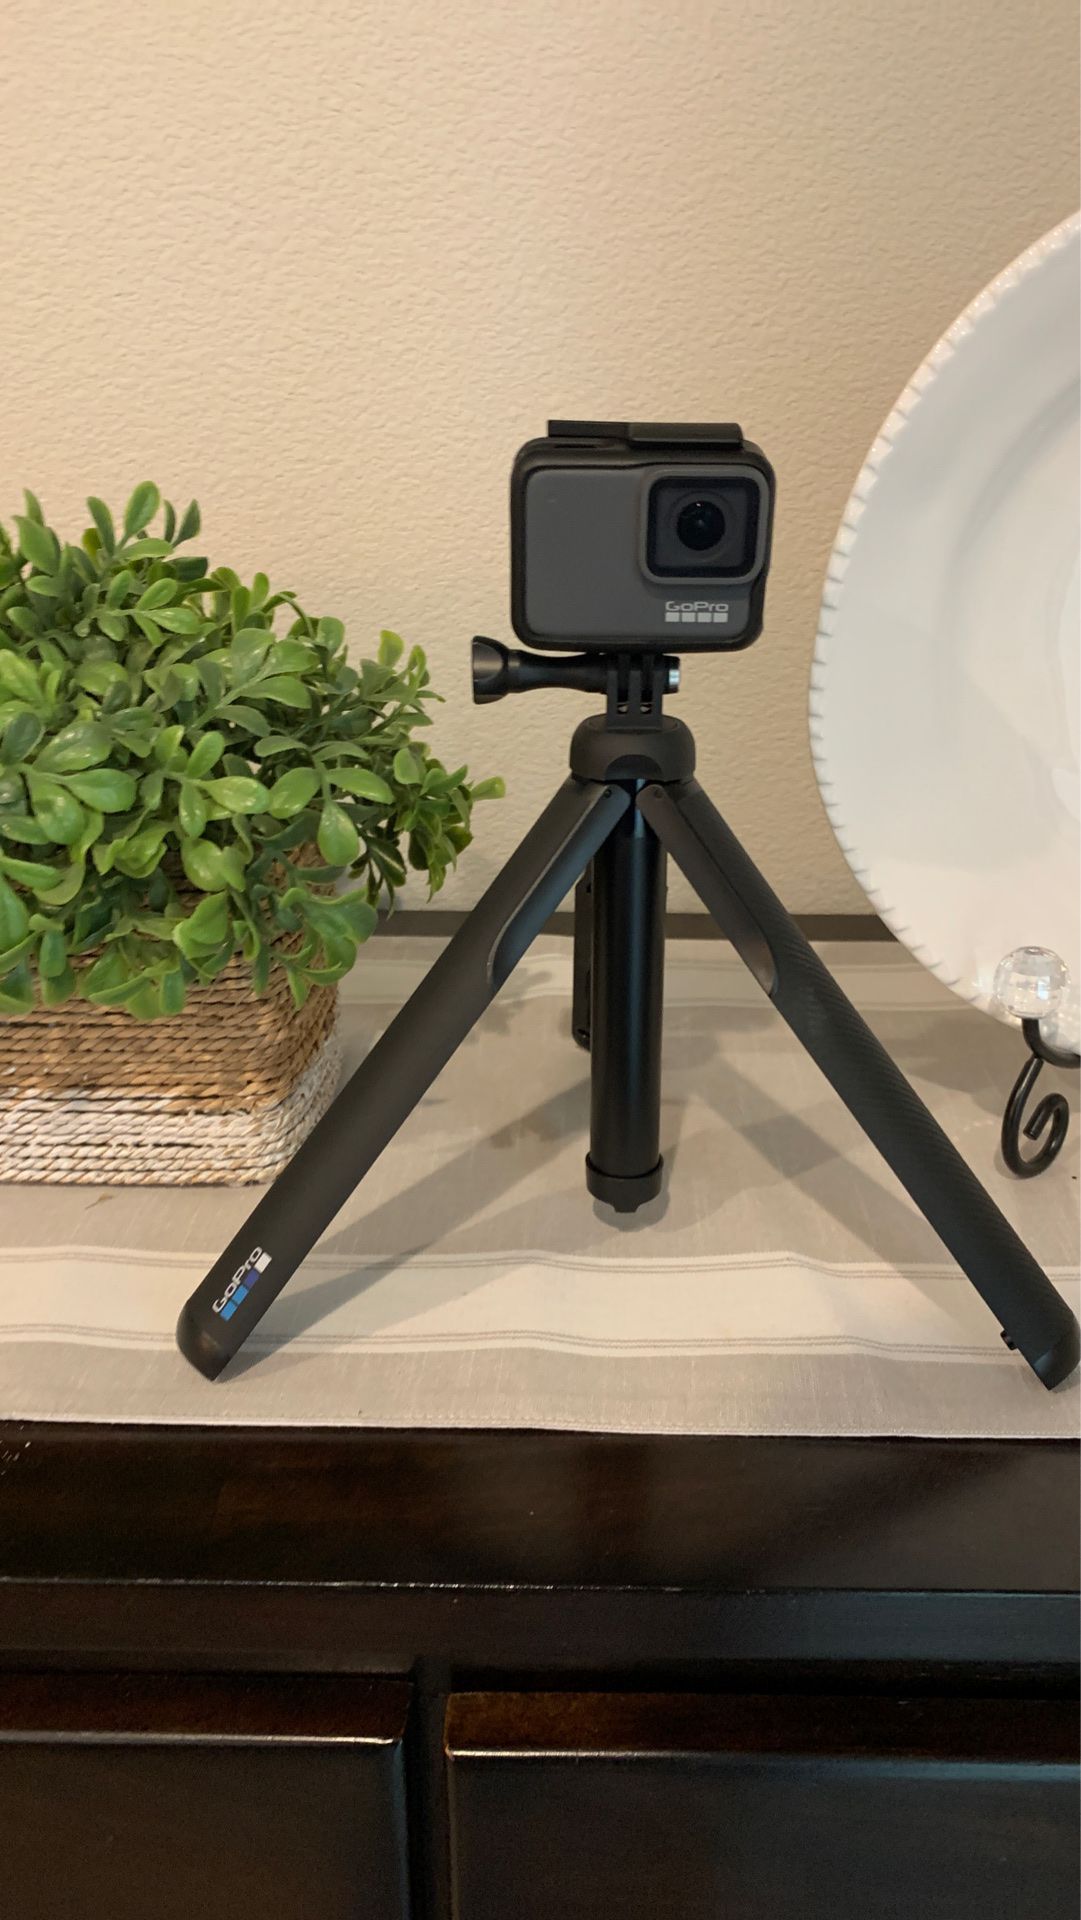 GoPro hero 7 silver with tripod and 256 GB micro SD card